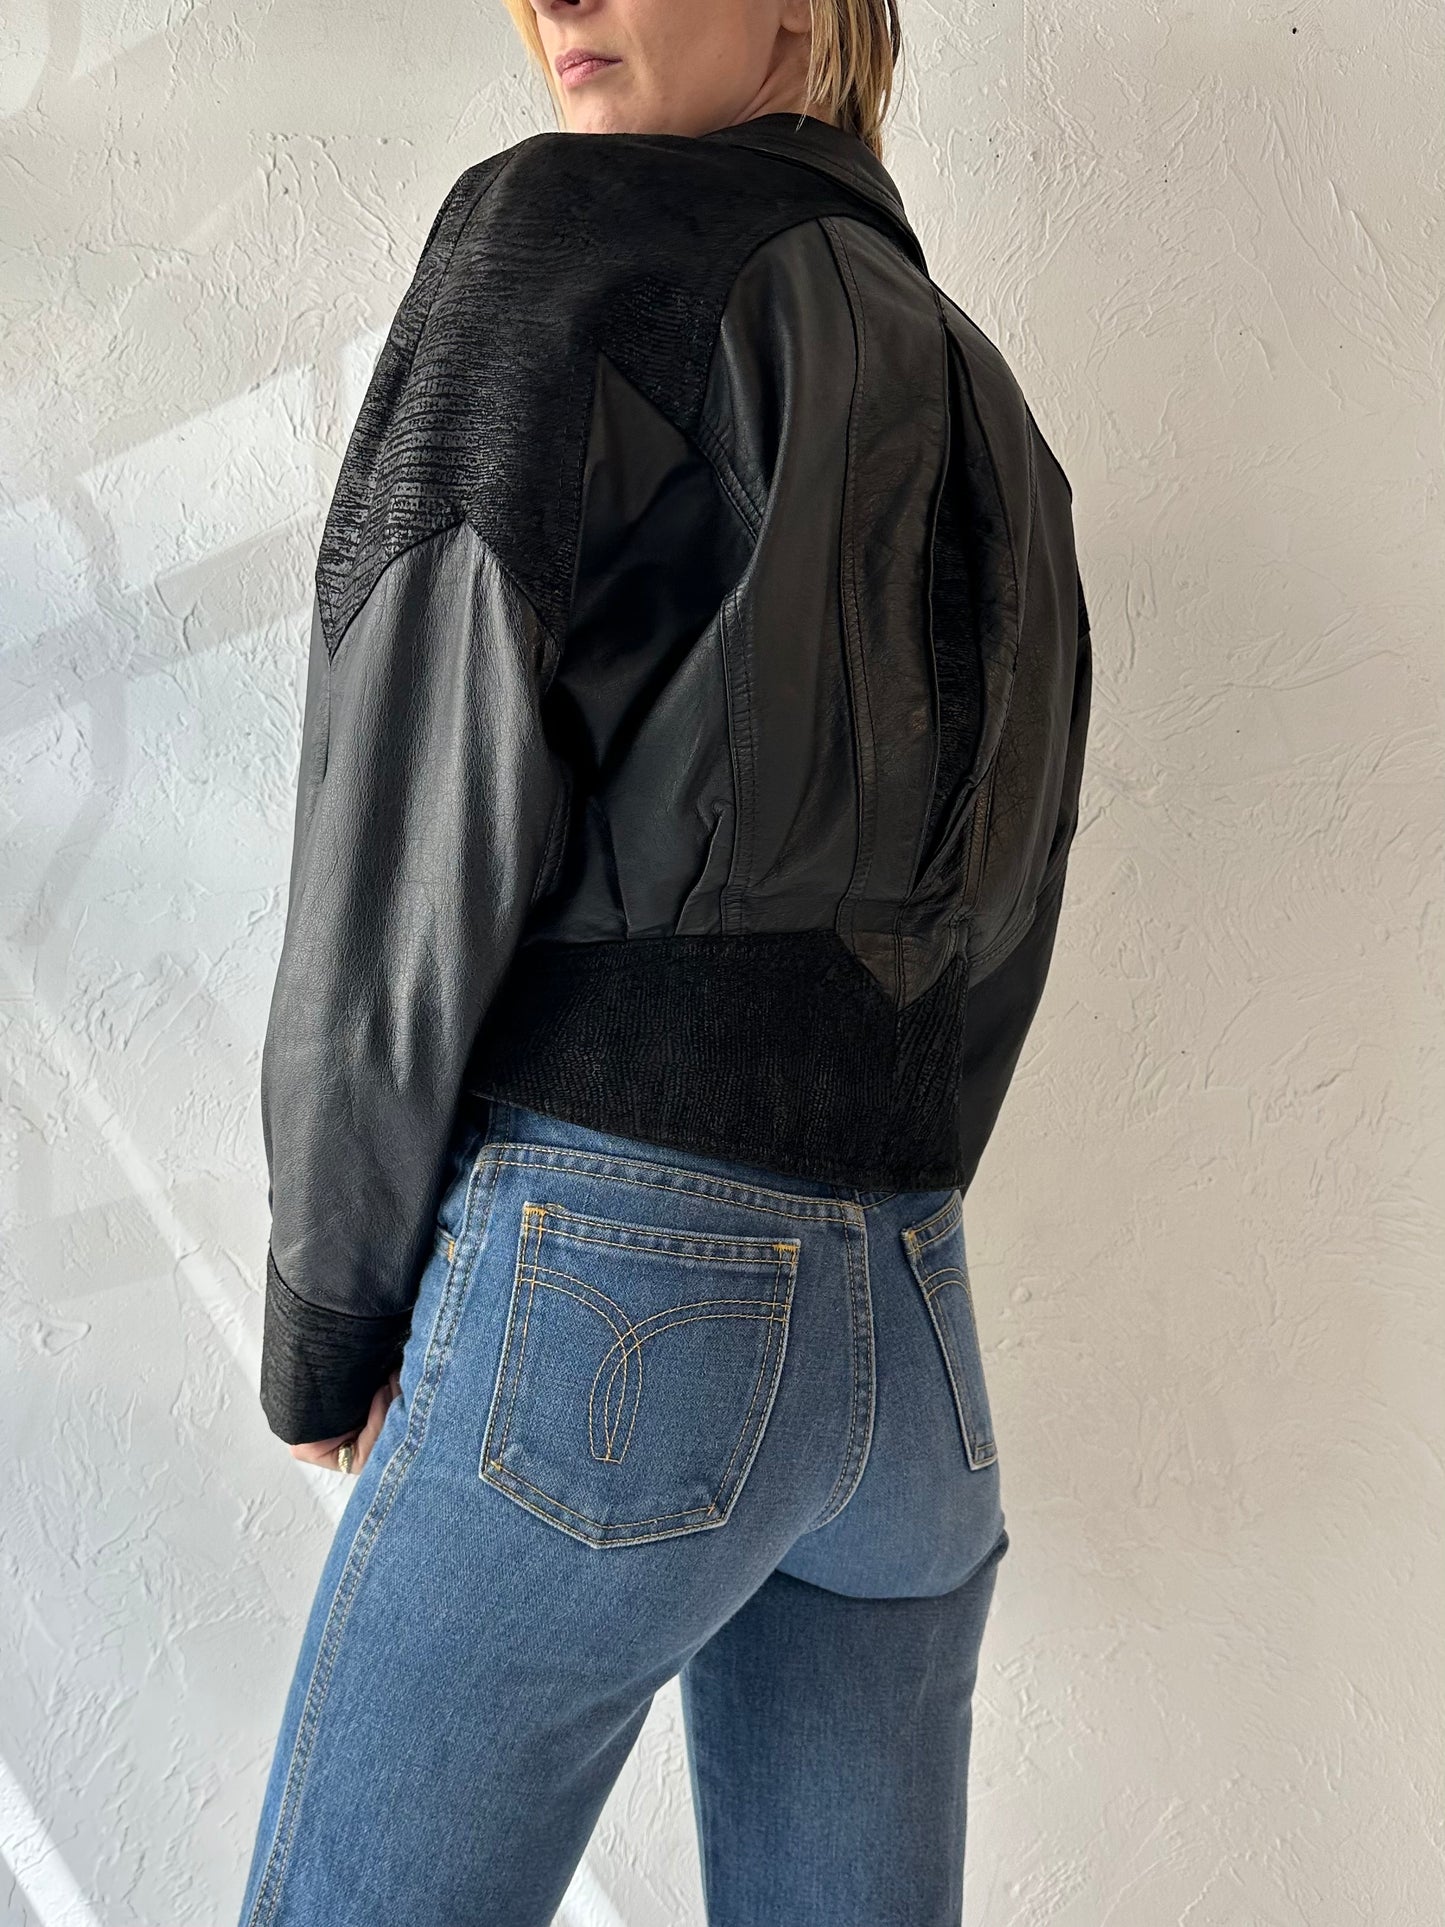 90s 'Chia' Black Leather Jacket / Small